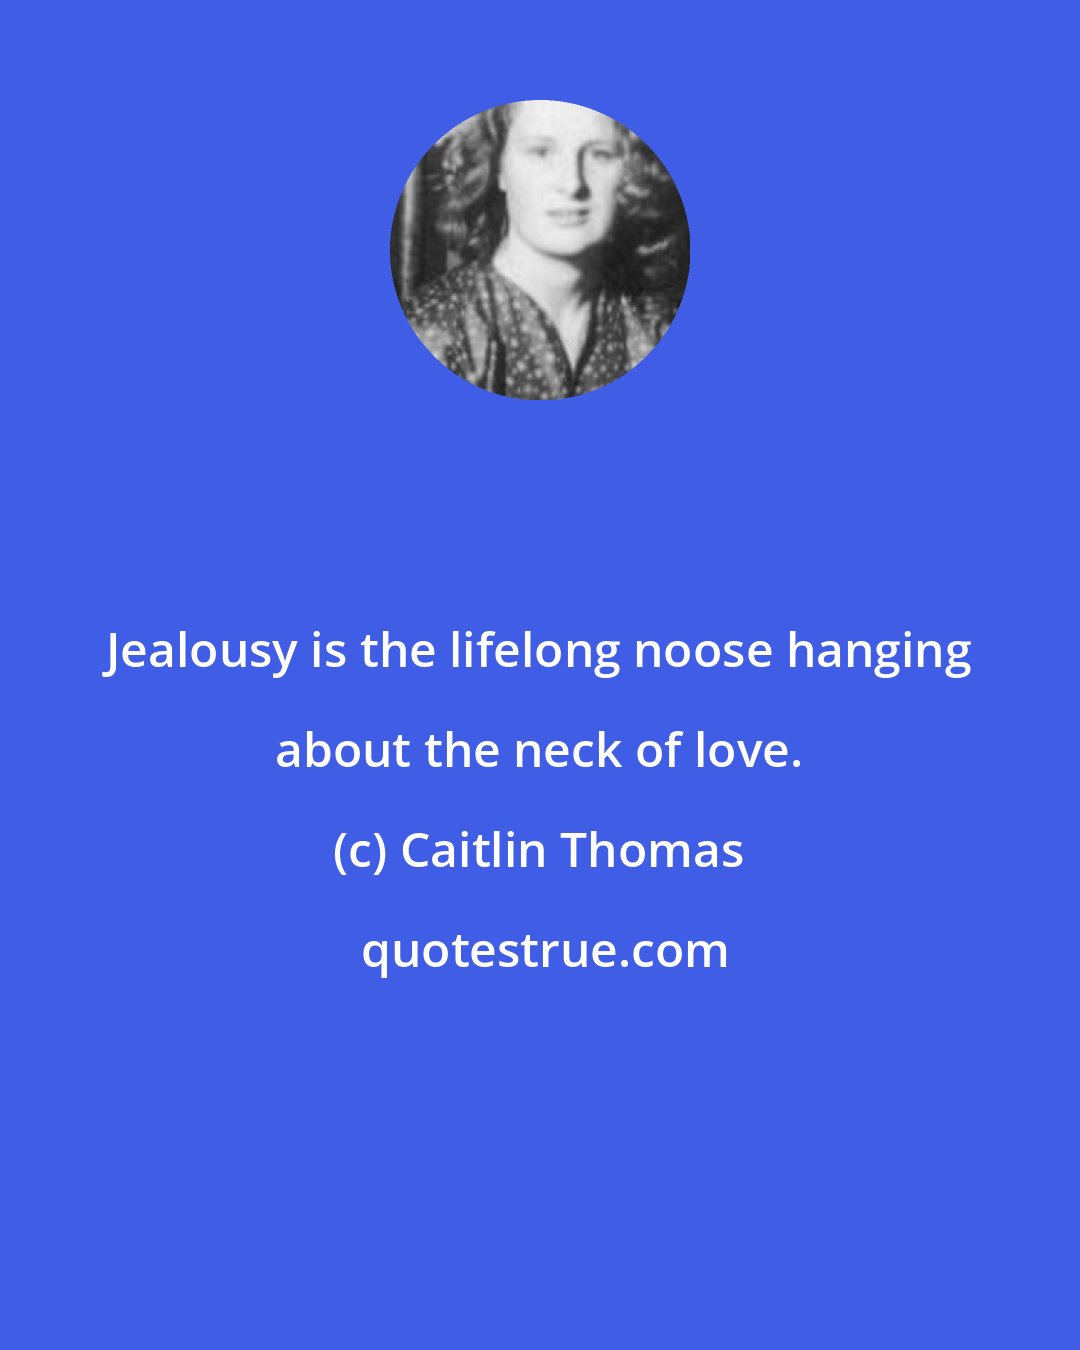 Caitlin Thomas: Jealousy is the lifelong noose hanging about the neck of love.